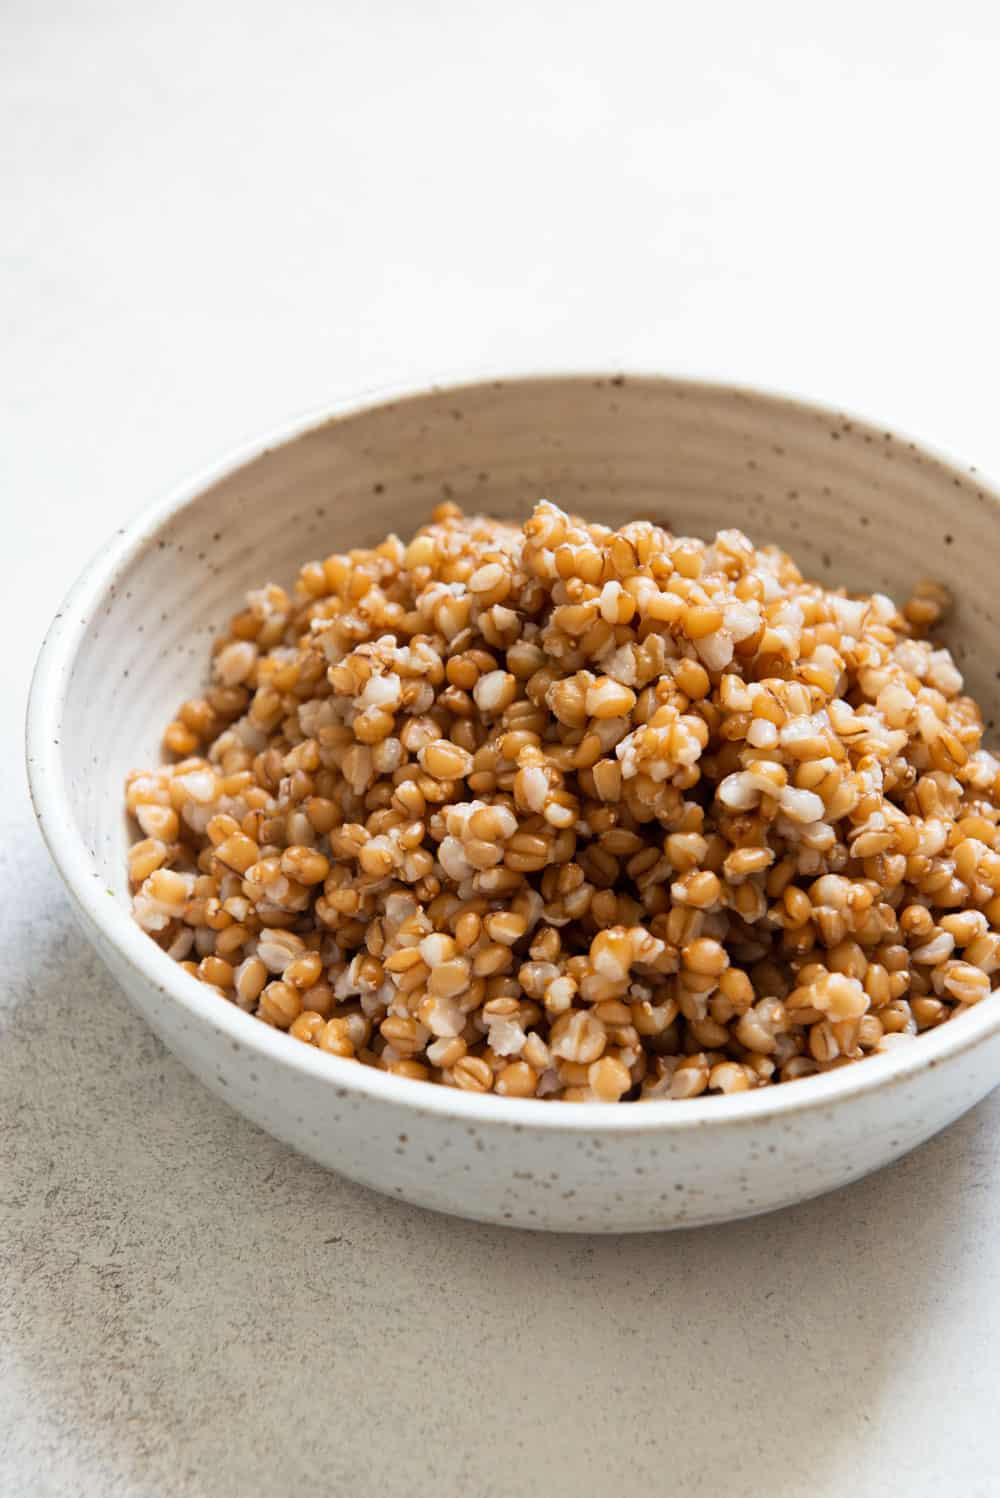 How to Cook Wheat Berries